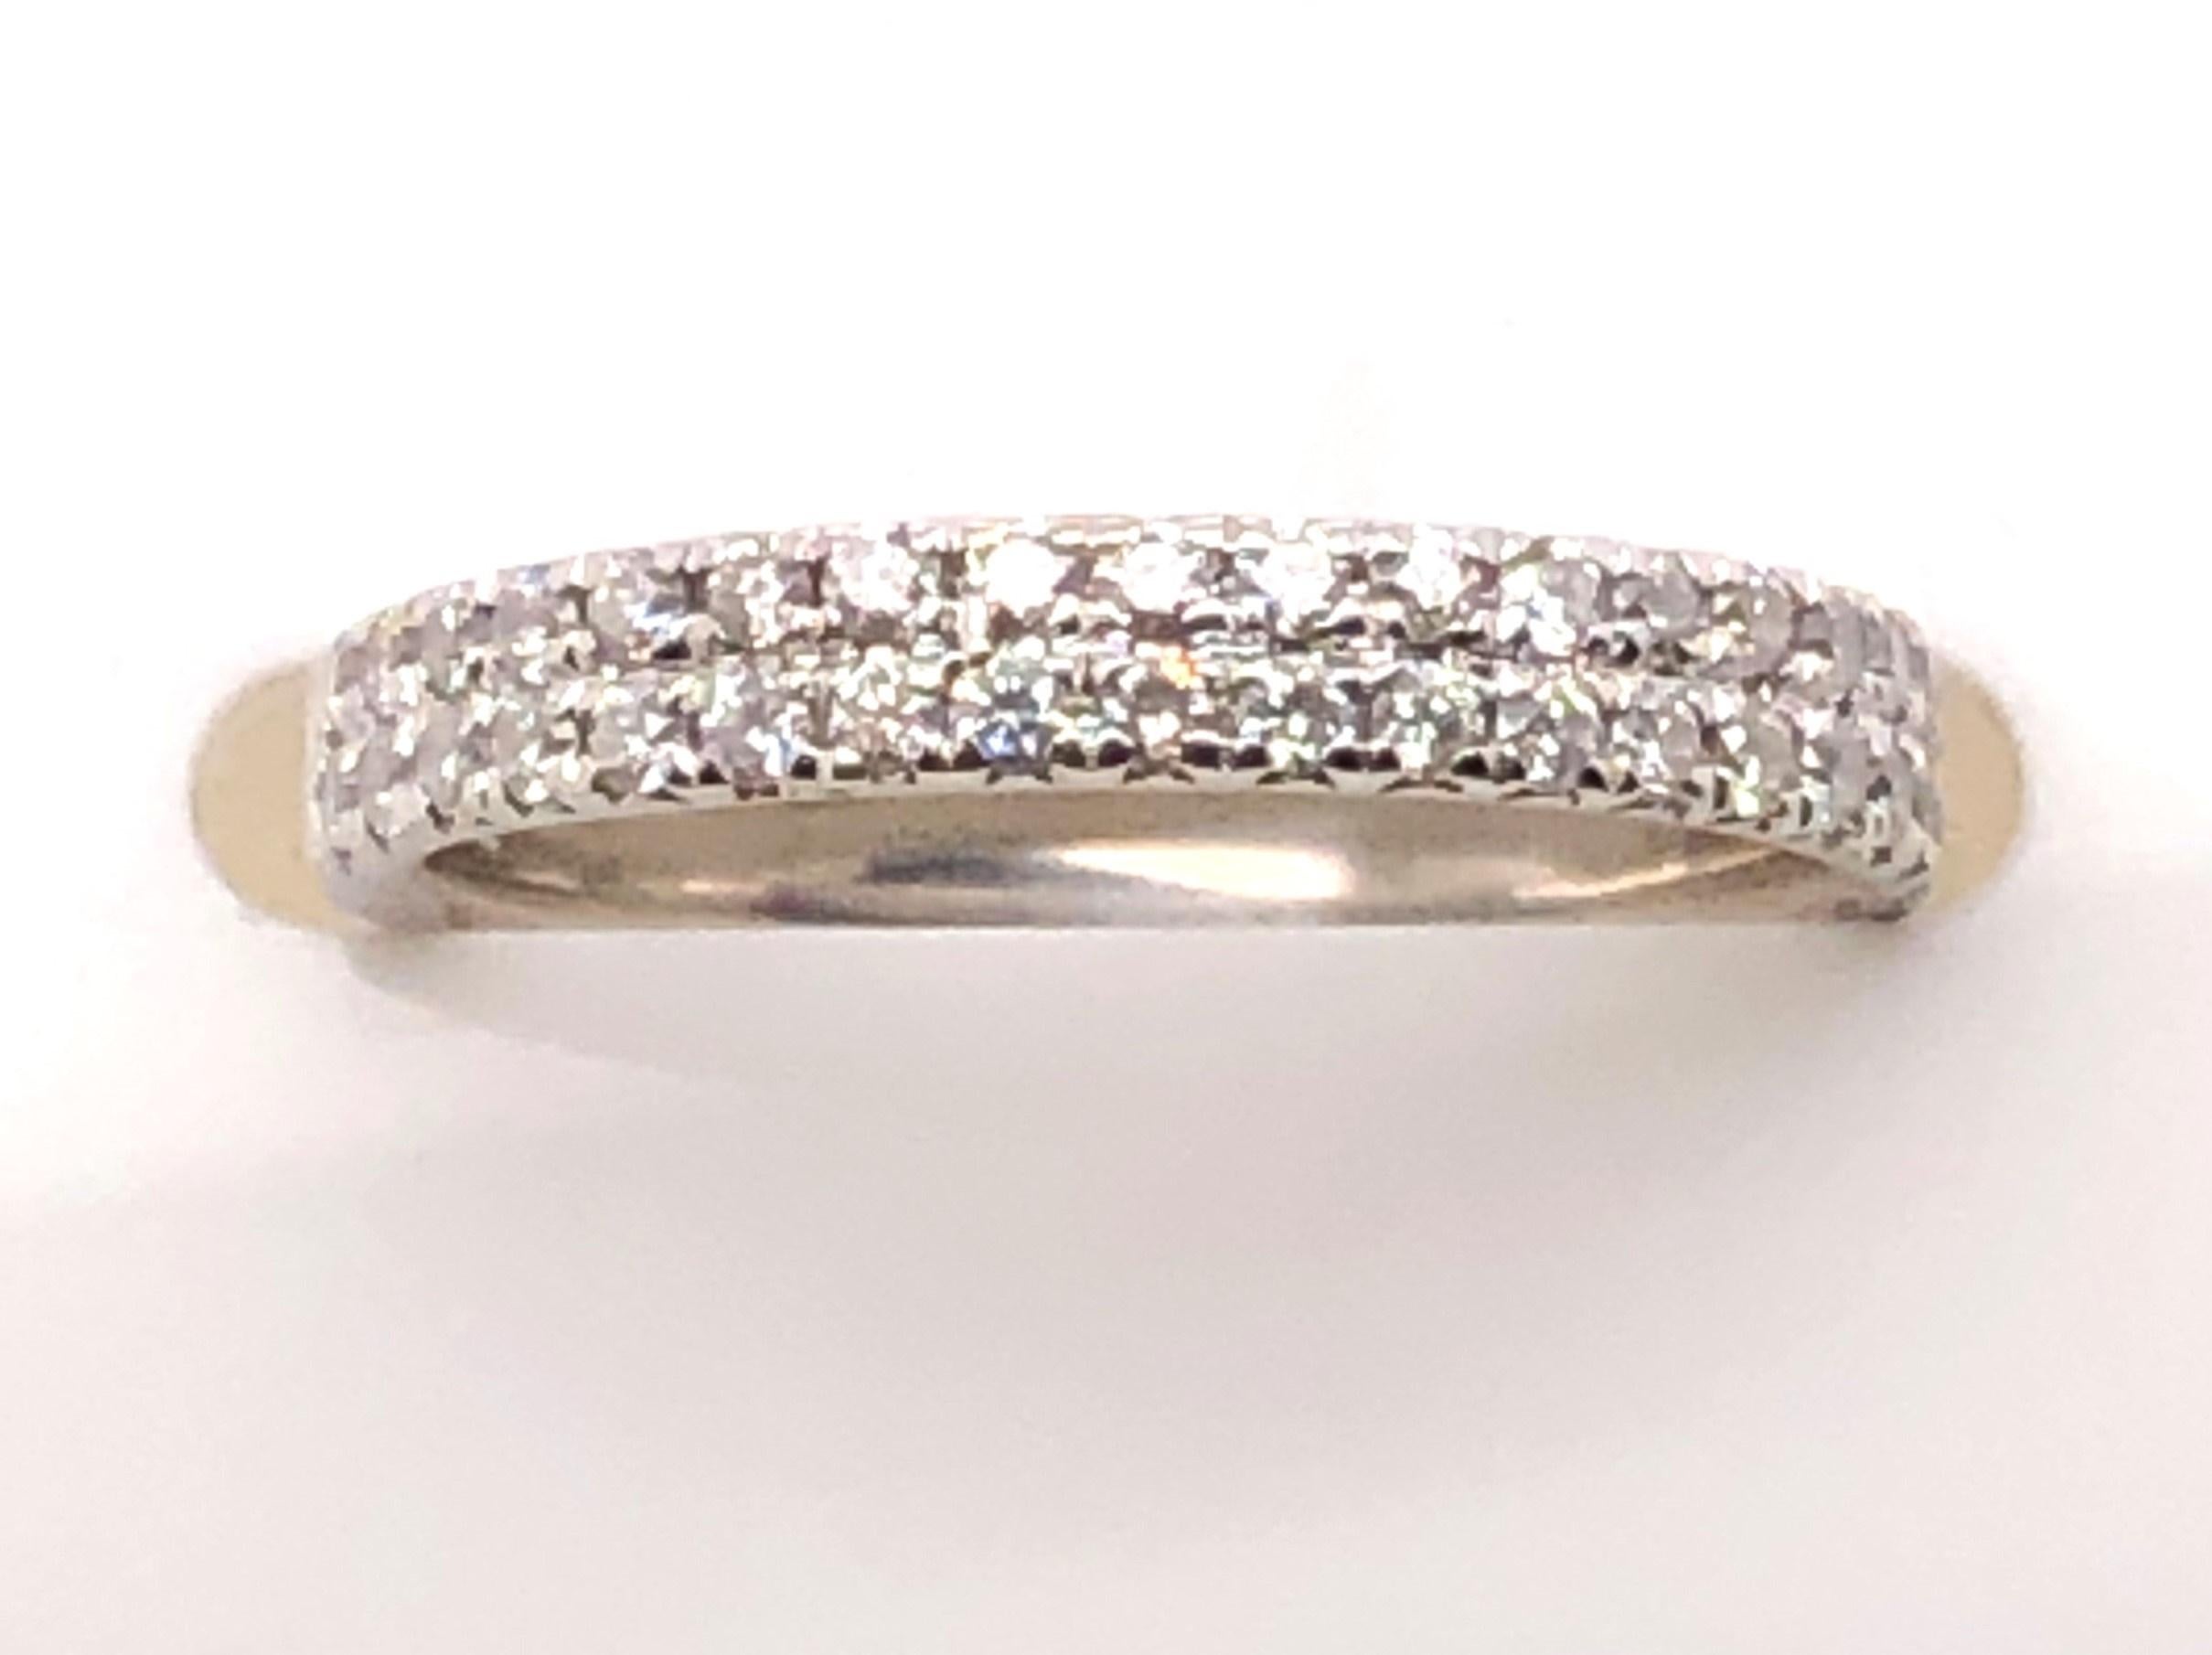 Simple and elegant, this estate diamond double row band adds the sparkle you want to any ring stack! The ring is all solid 14kt white gold with approximately .38 carats of micro-prong set diamonds. The diamonds are H-I color and SI1-I1 Clarity. This